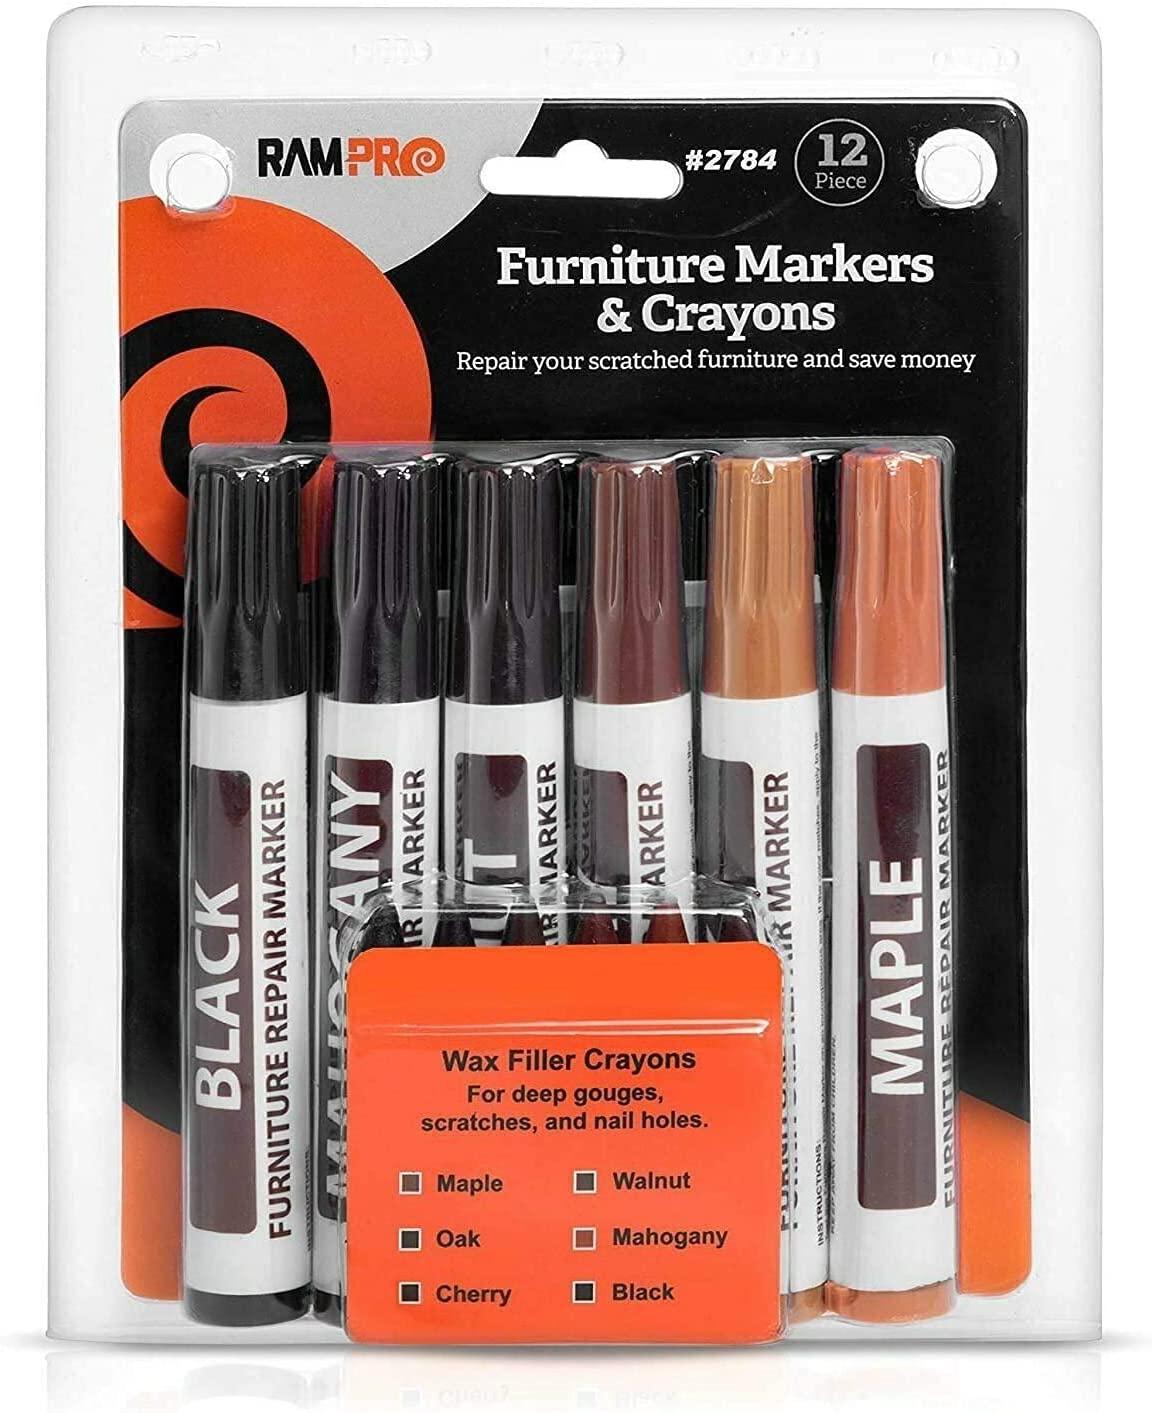 Rampro Furniture Markers Touch Up, Wood Scratch and Stain Repair, 8 Felt Tip Markers, 8 Wax Stick Furniture Crayons & Sharpener, Maple, Oak, Cherry